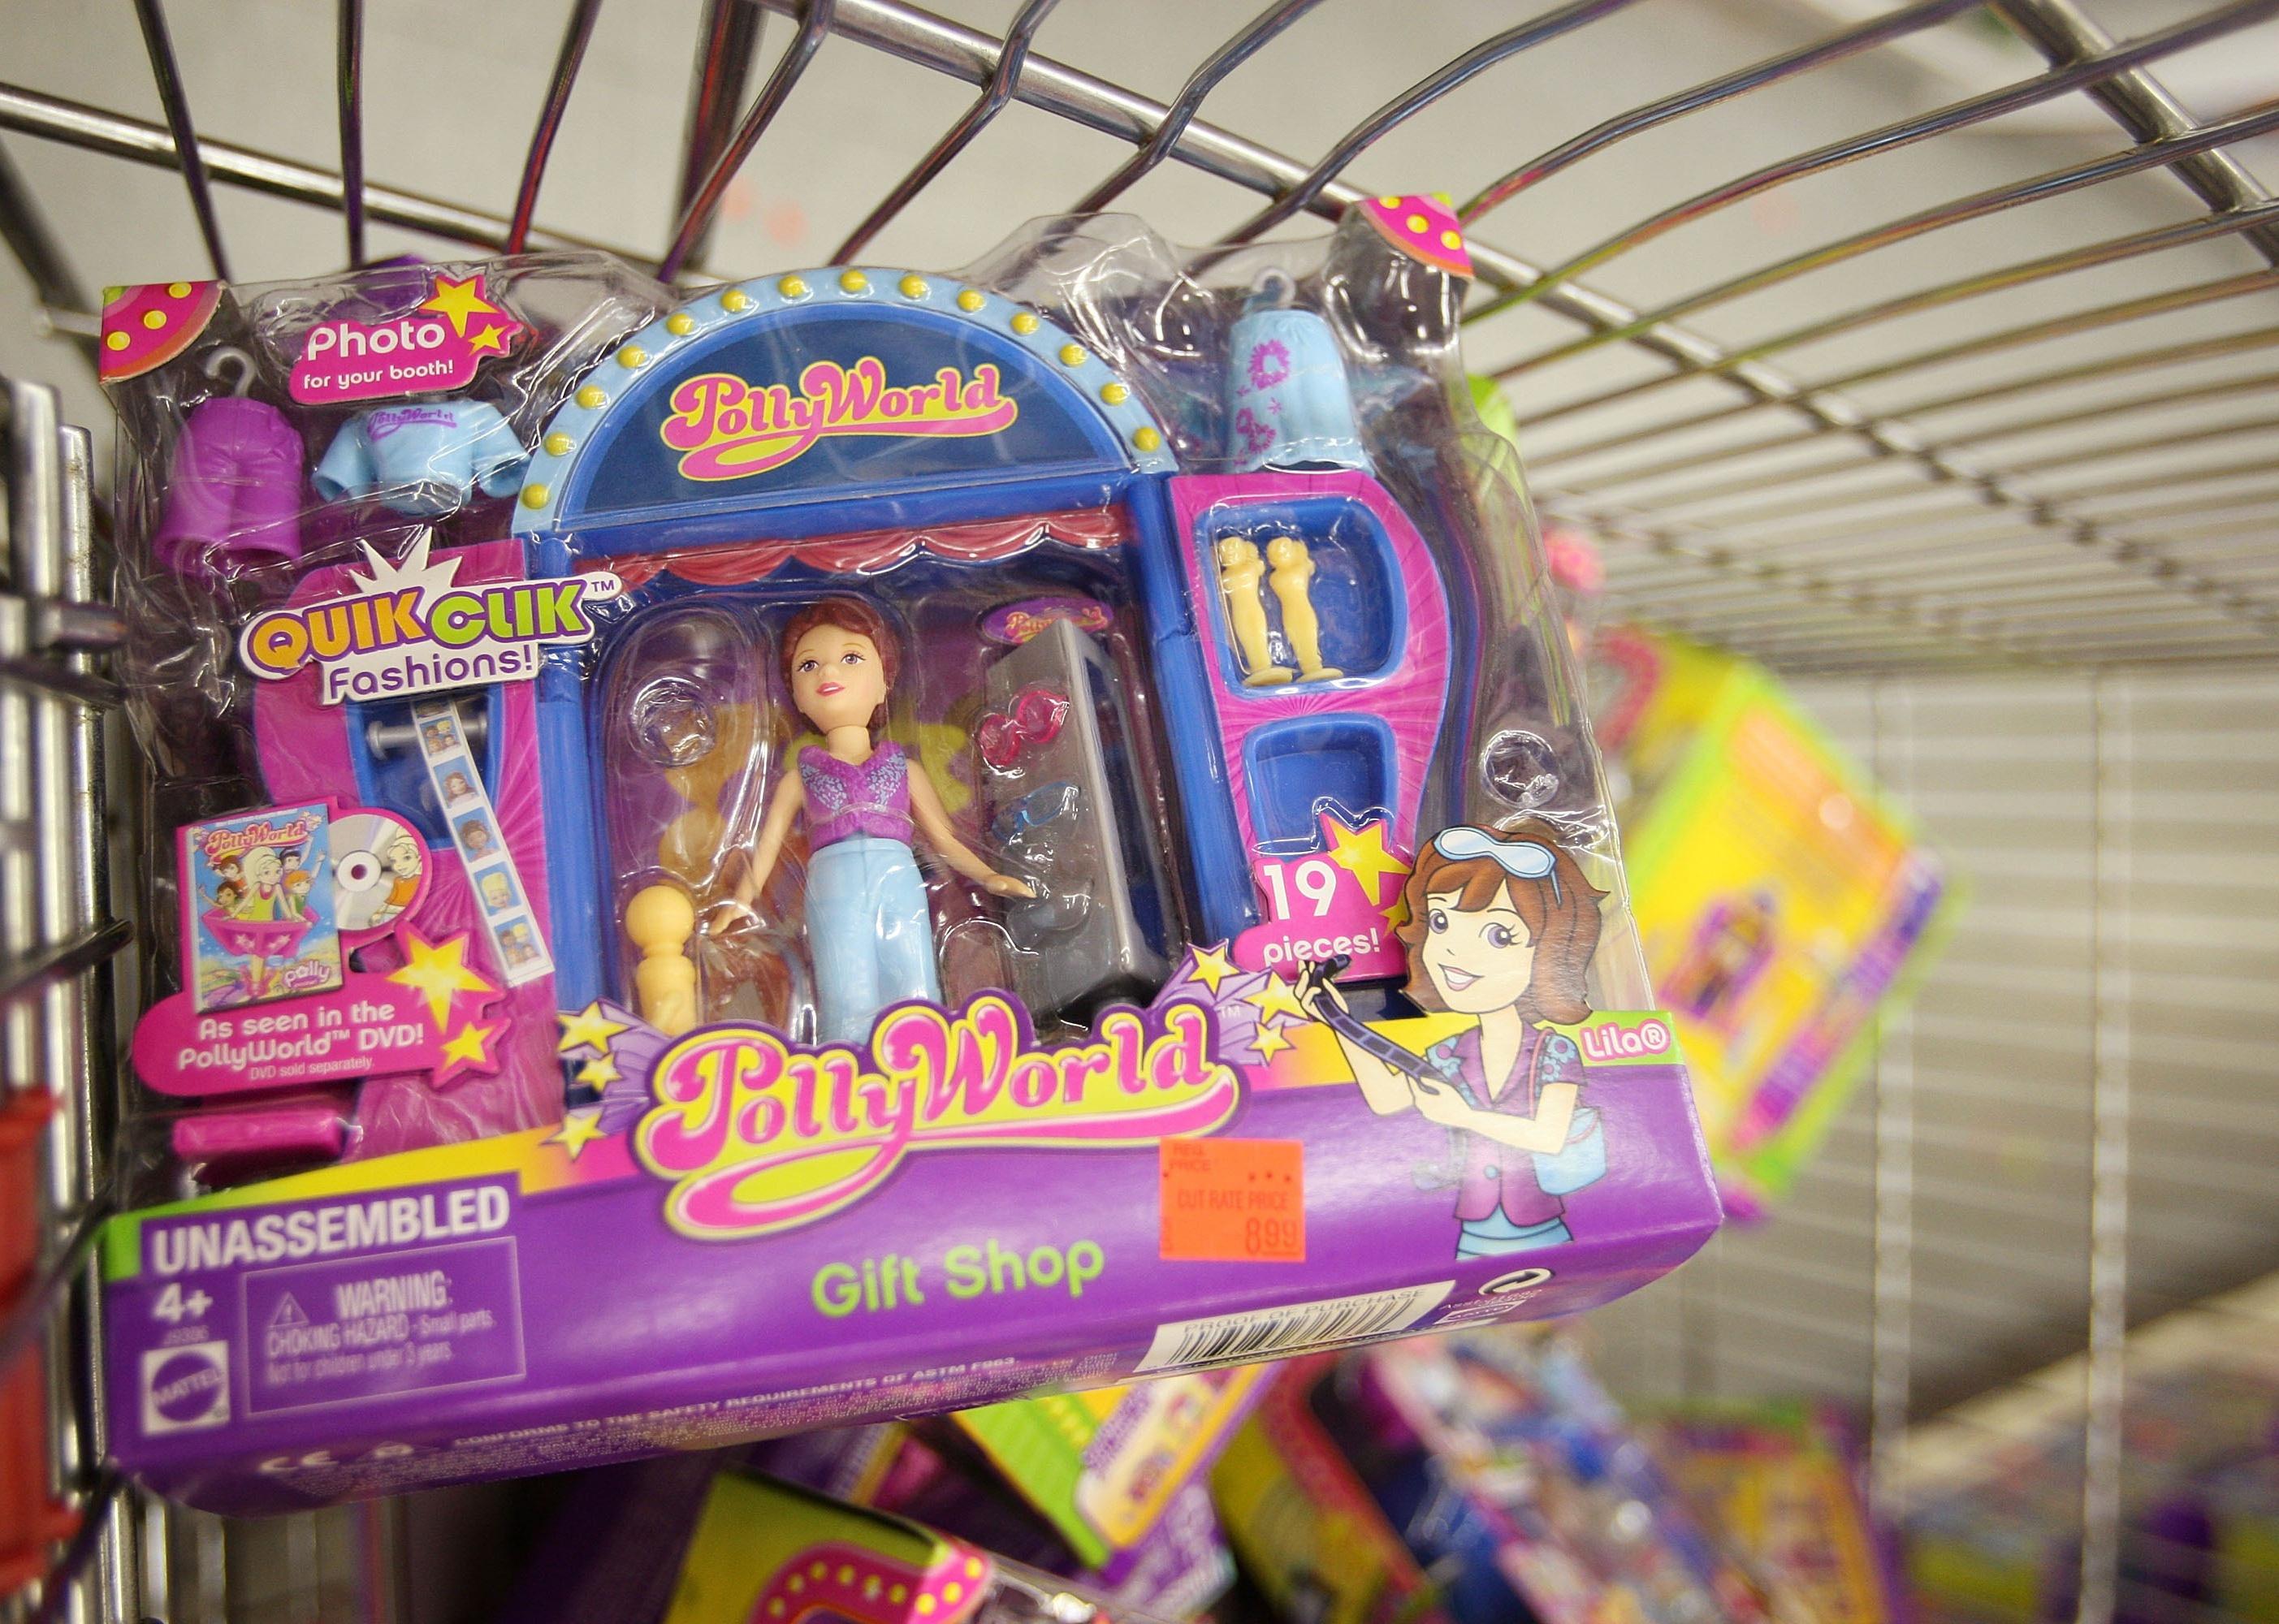 A colorful Polly Pocket playset sits in a basket full of recalled toys at a toy store.